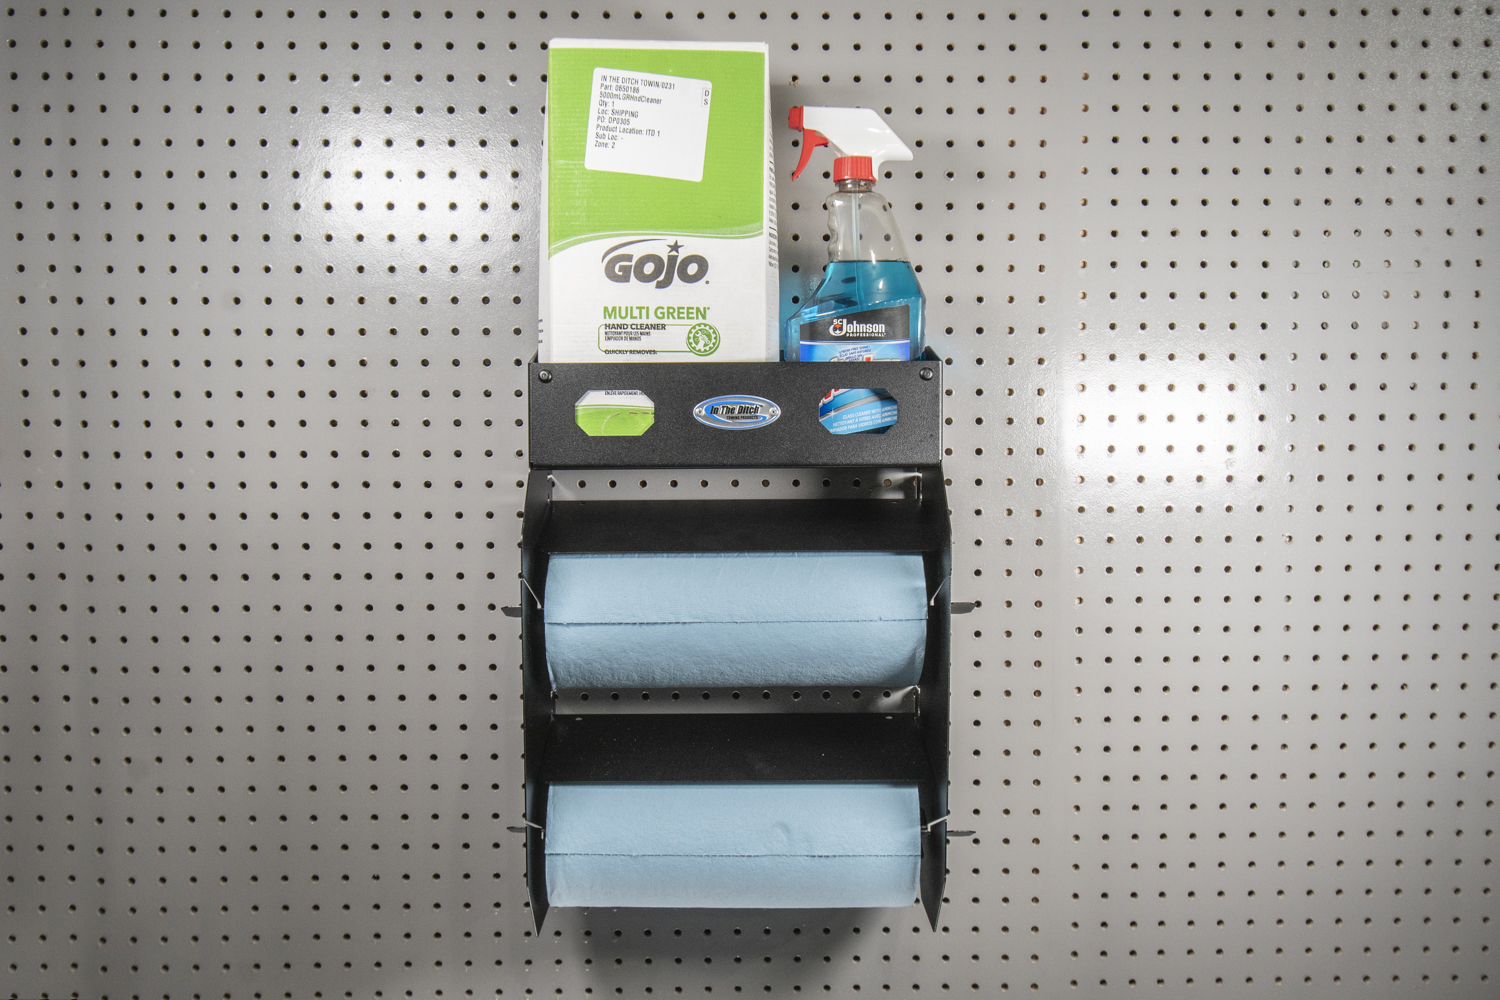 https://intheditch.com/wp-content/uploads/471-In-The-Ditch-Garage-Paper-Towel-Holder-Double-w-Shelf-ITD1765.jpg